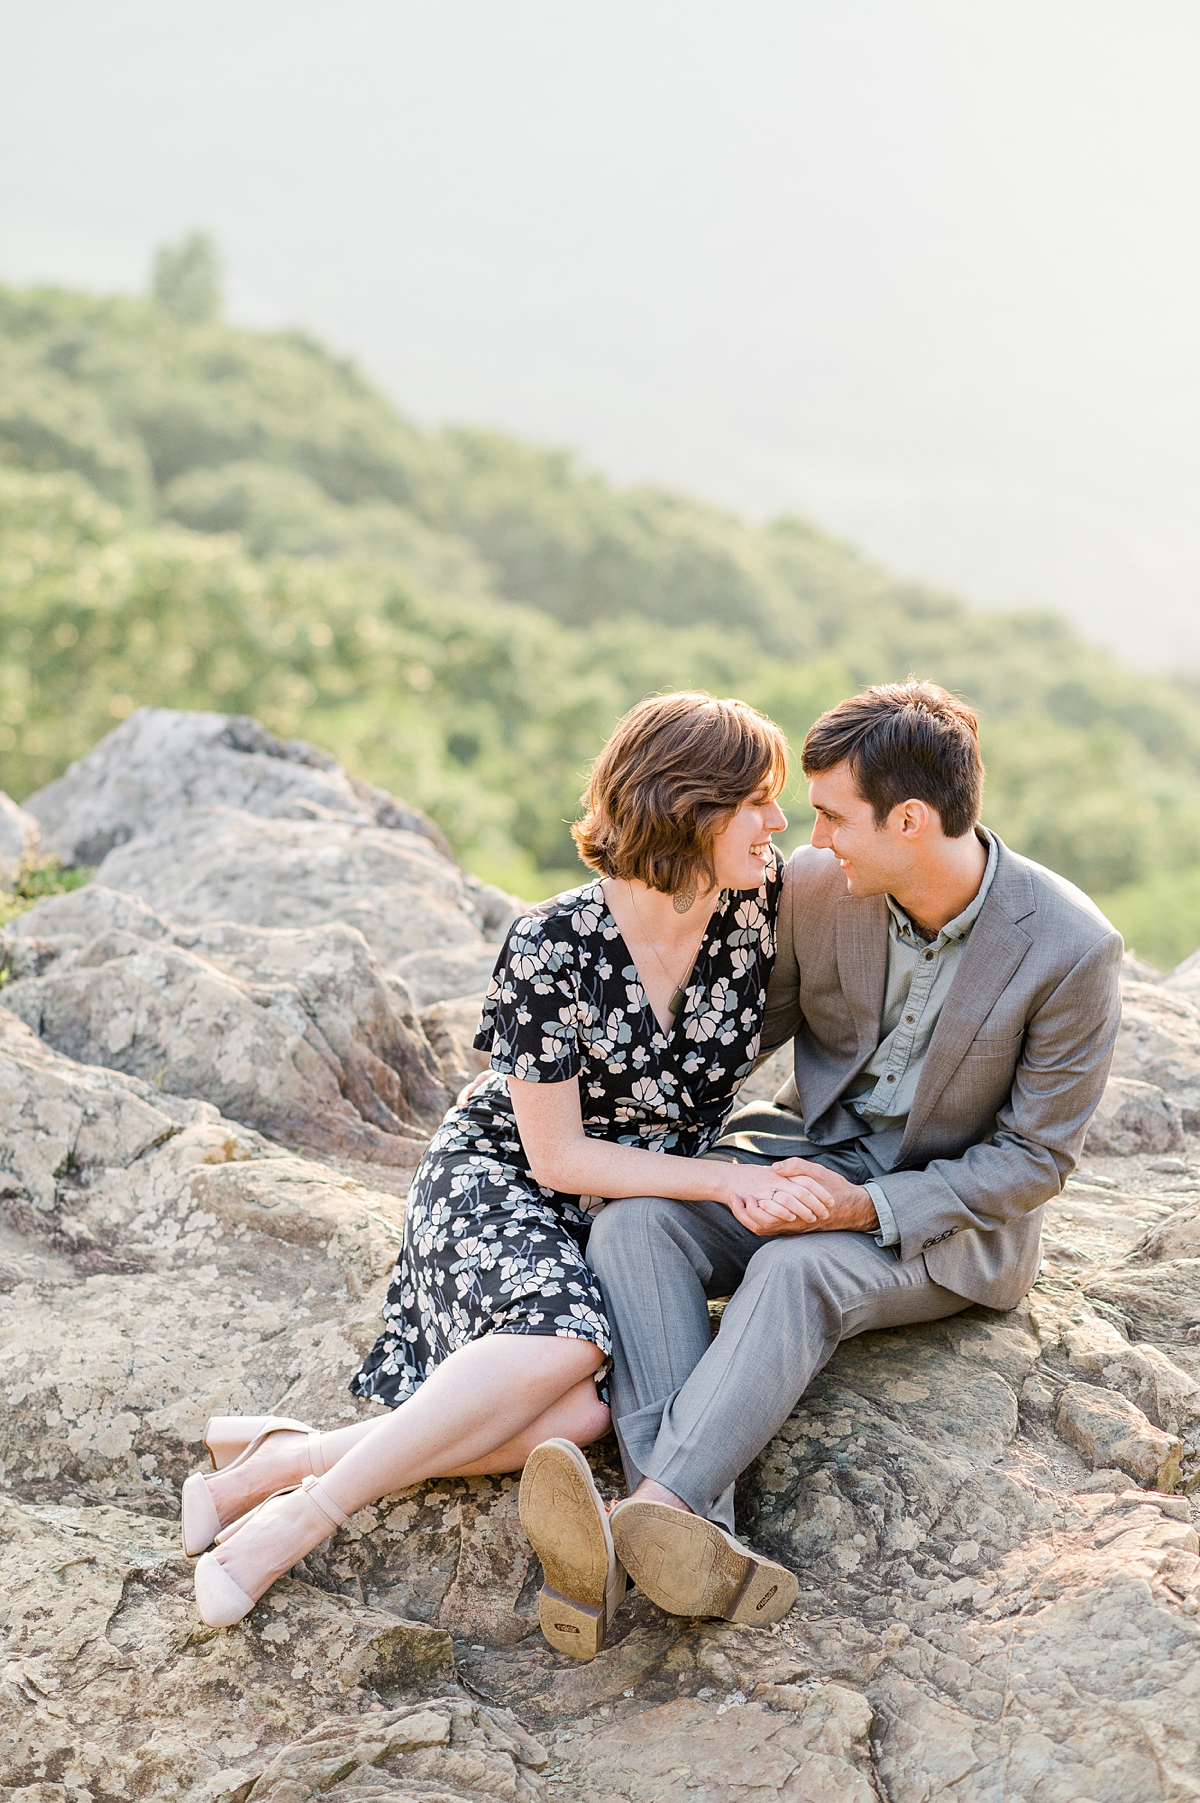 Mountain View Engagement Session at Raven's Roost Overlook by Kailey Brianne Photography. 